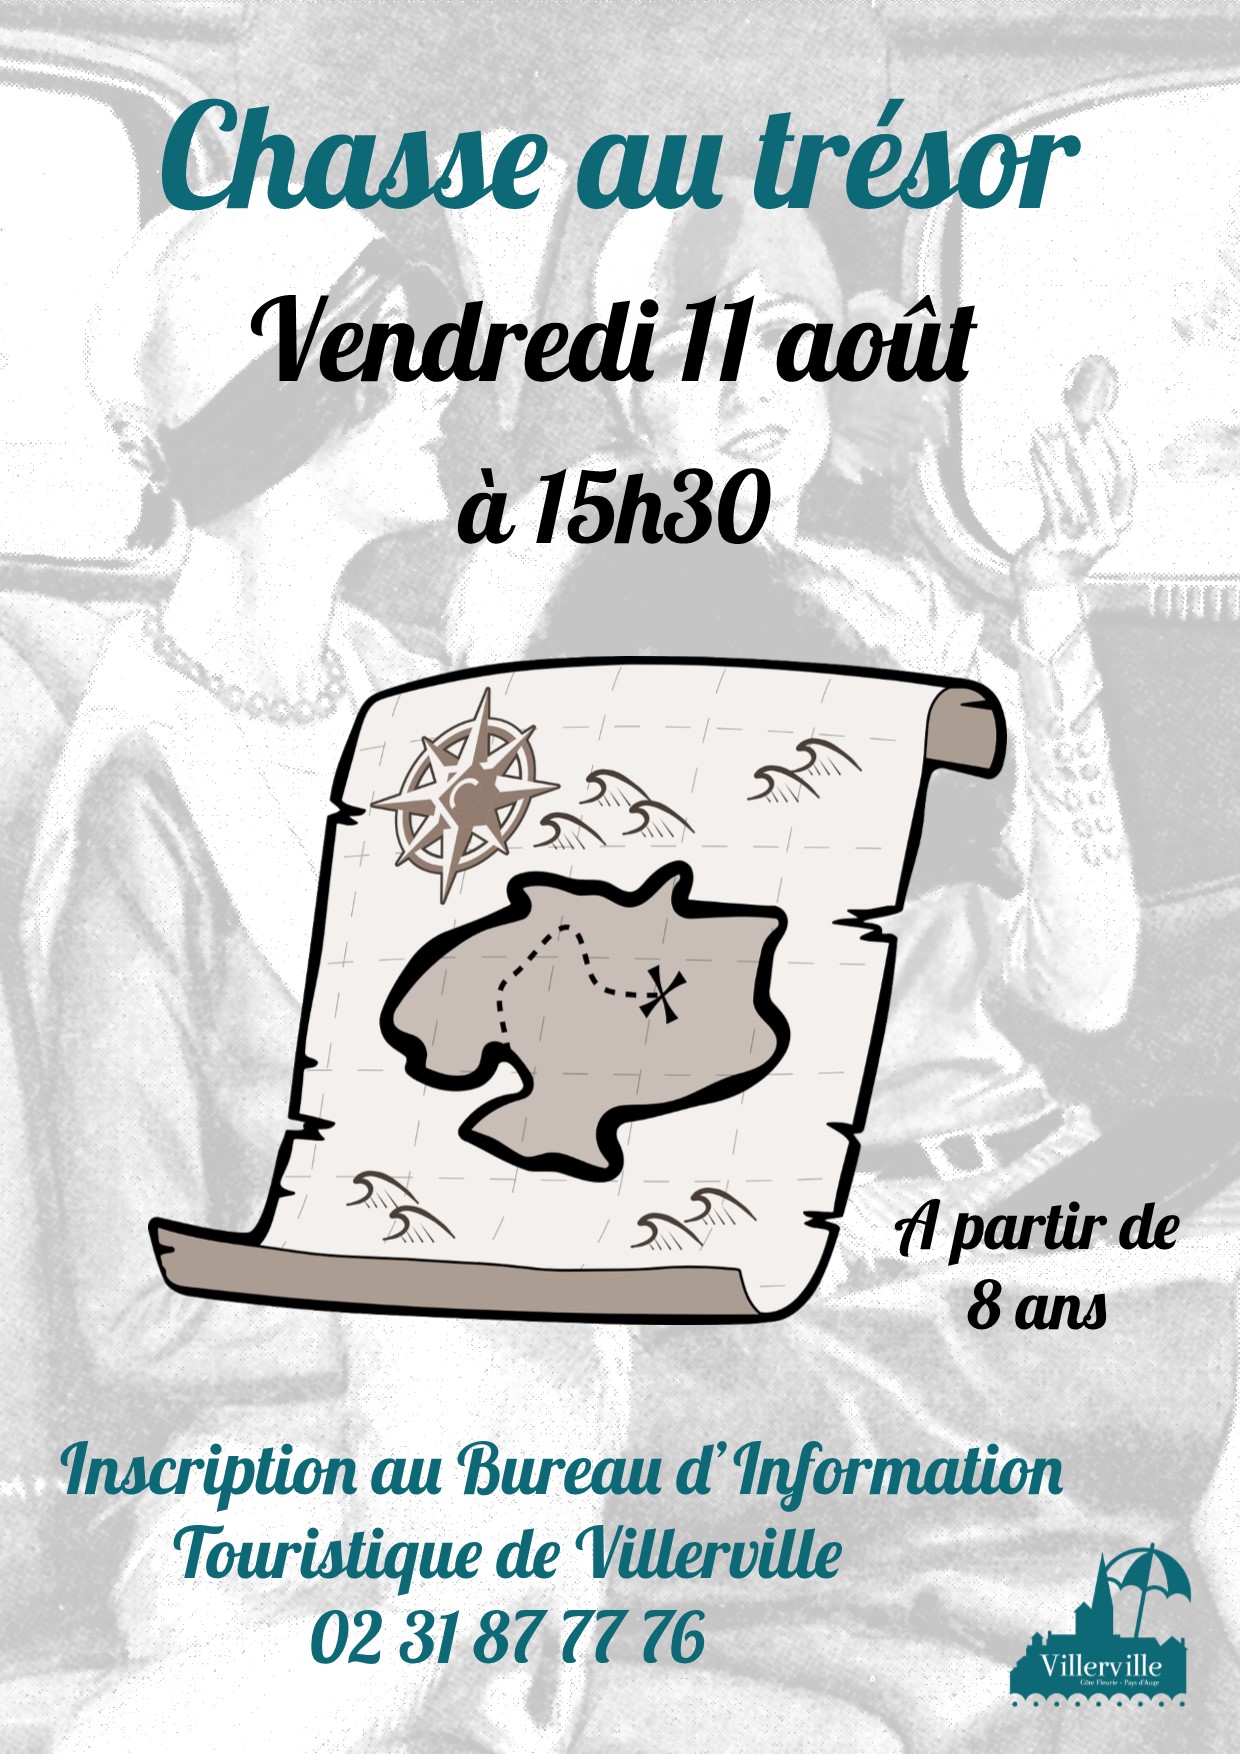 Affiche chasseautresor 11aout